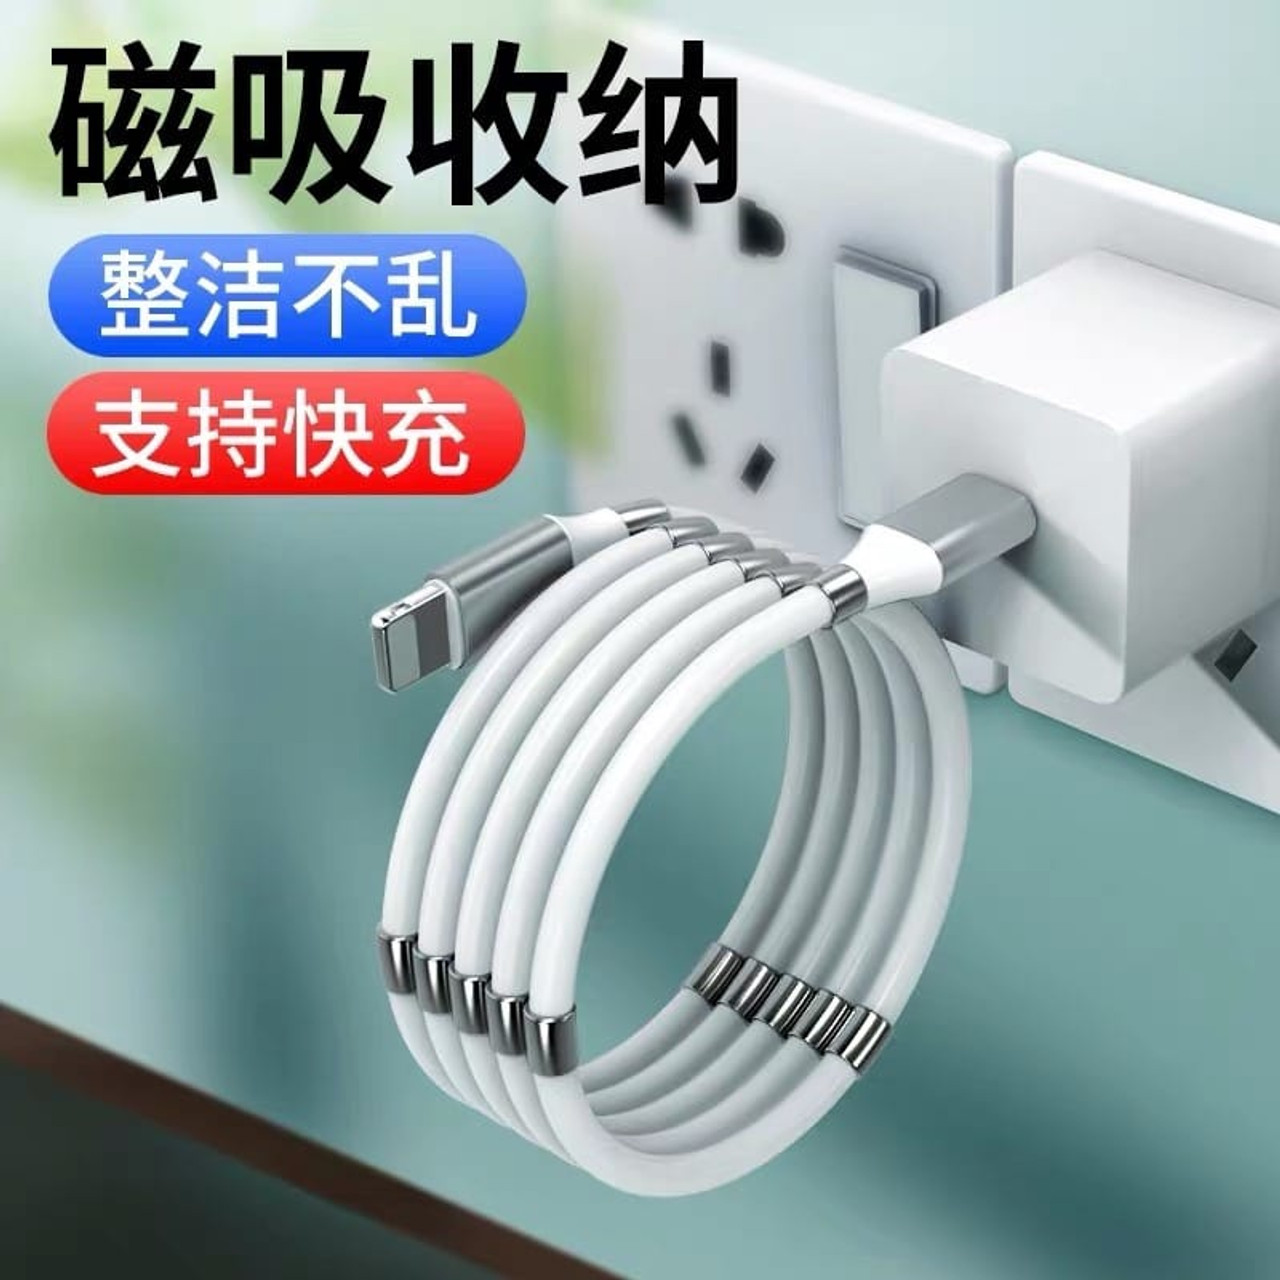 CABLE LIGHTING USB STORAGE DESIGN FAST DATA MAGNETIC ABSORPTION IPHONE  A. Ally  Sons